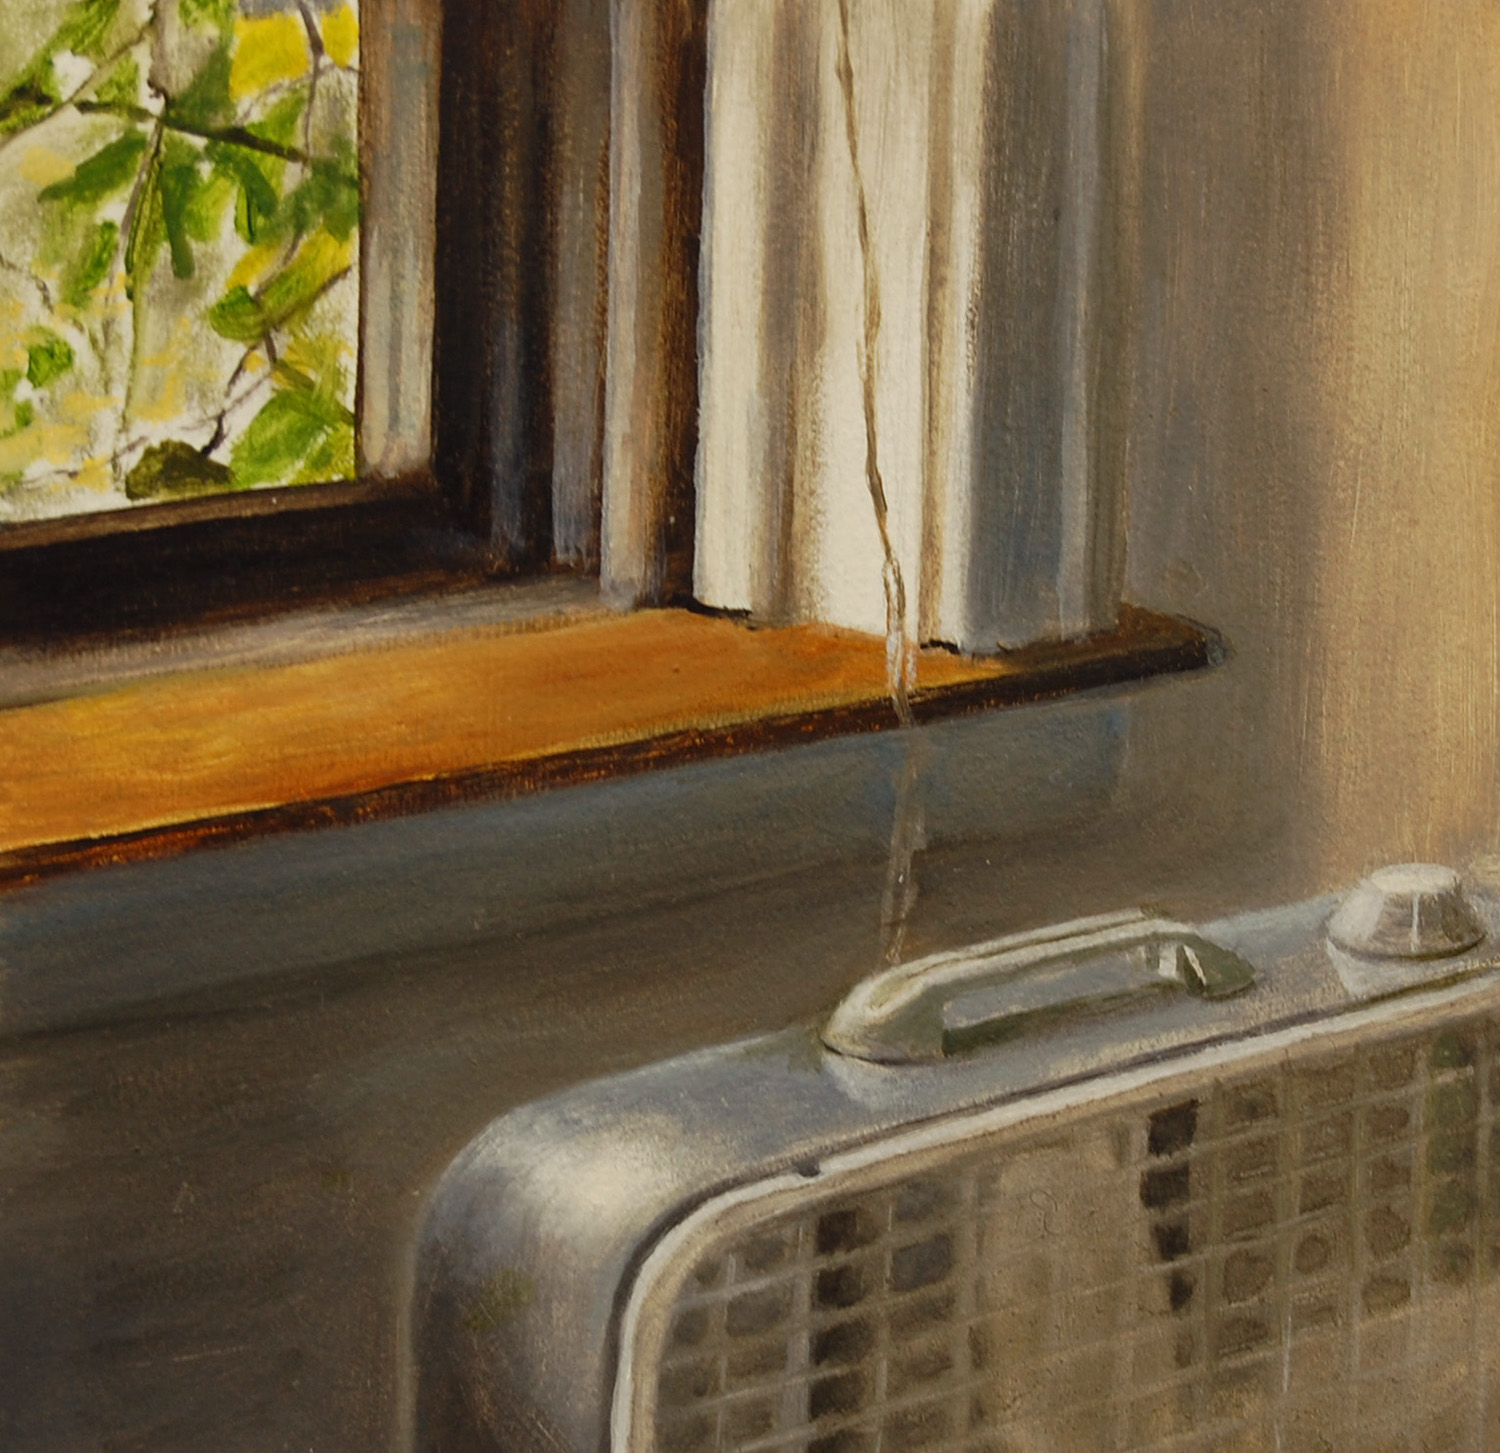   Fan by the Window   2003  Oil on paper  9 x 9 inches       